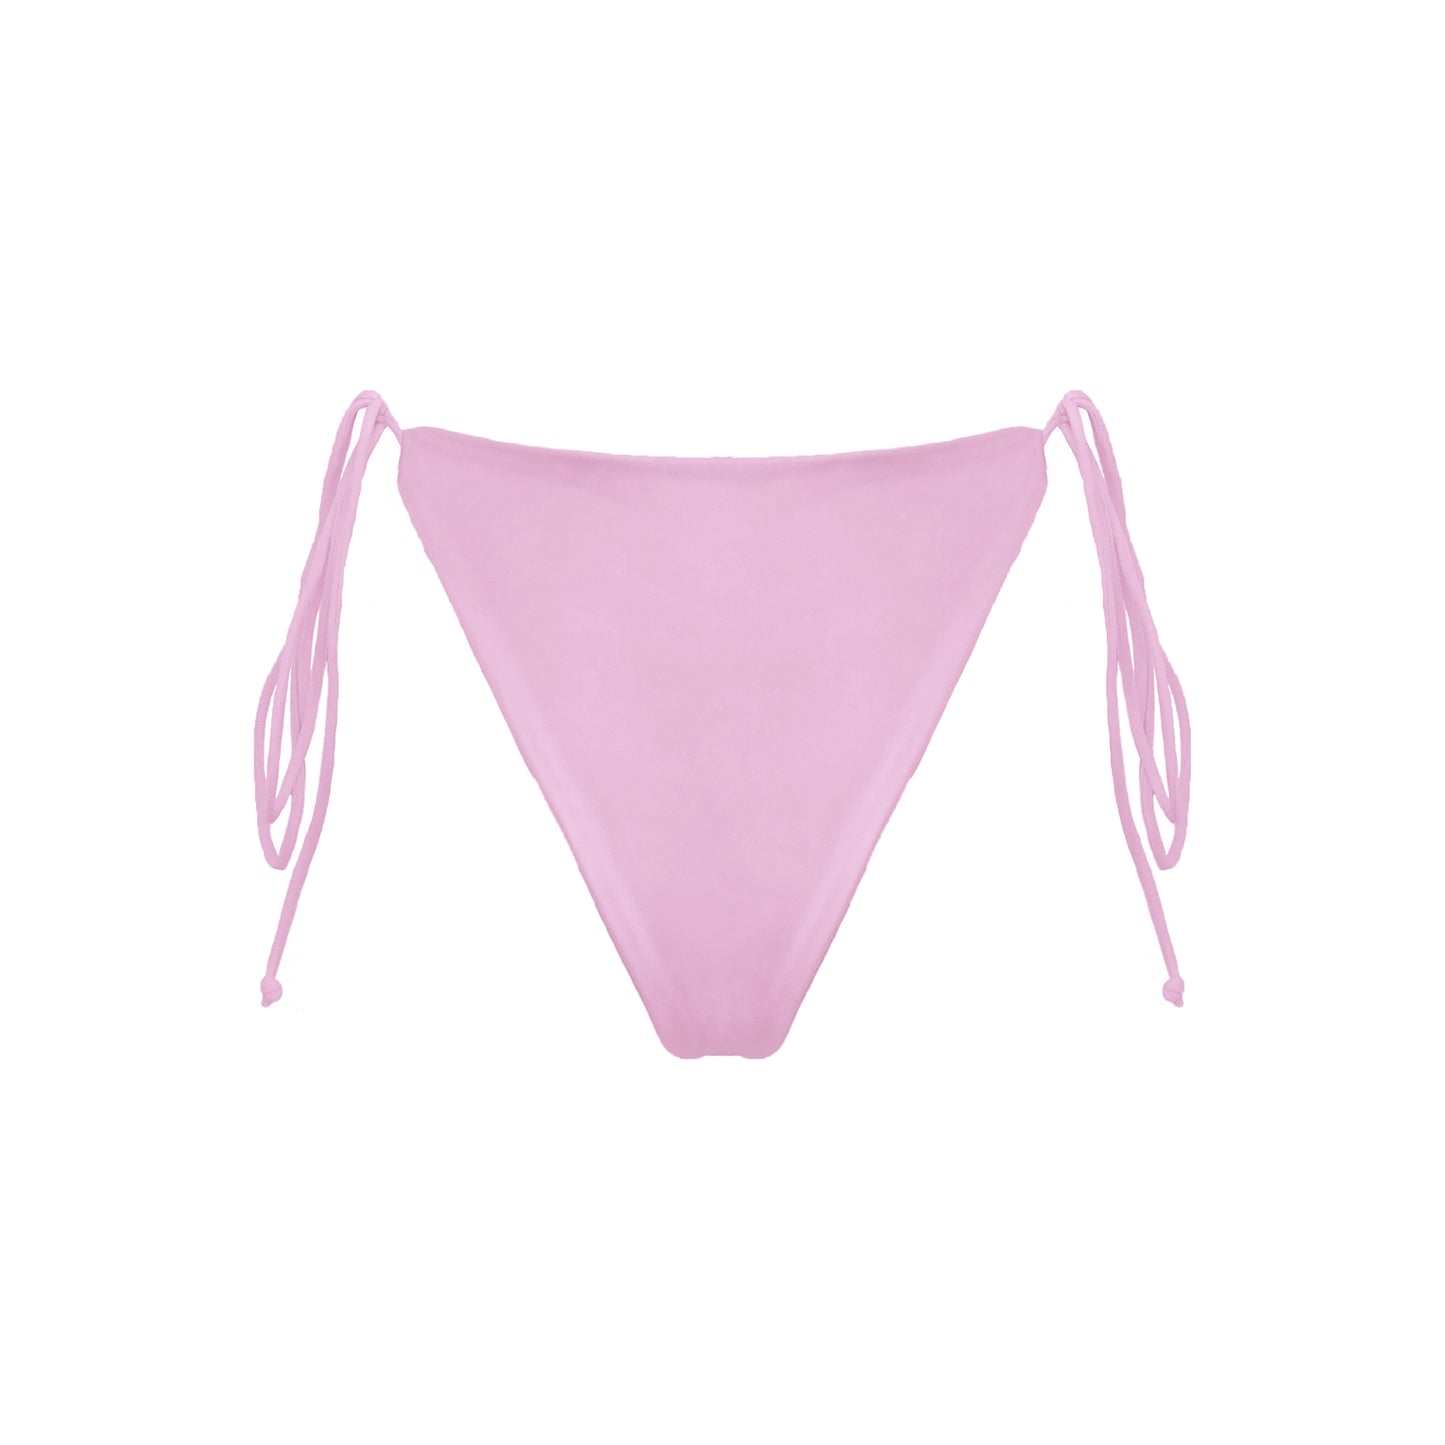 Back view pastel pink Ravello bikini bottom with adjustable side tie straps and cheeky bum coverage.